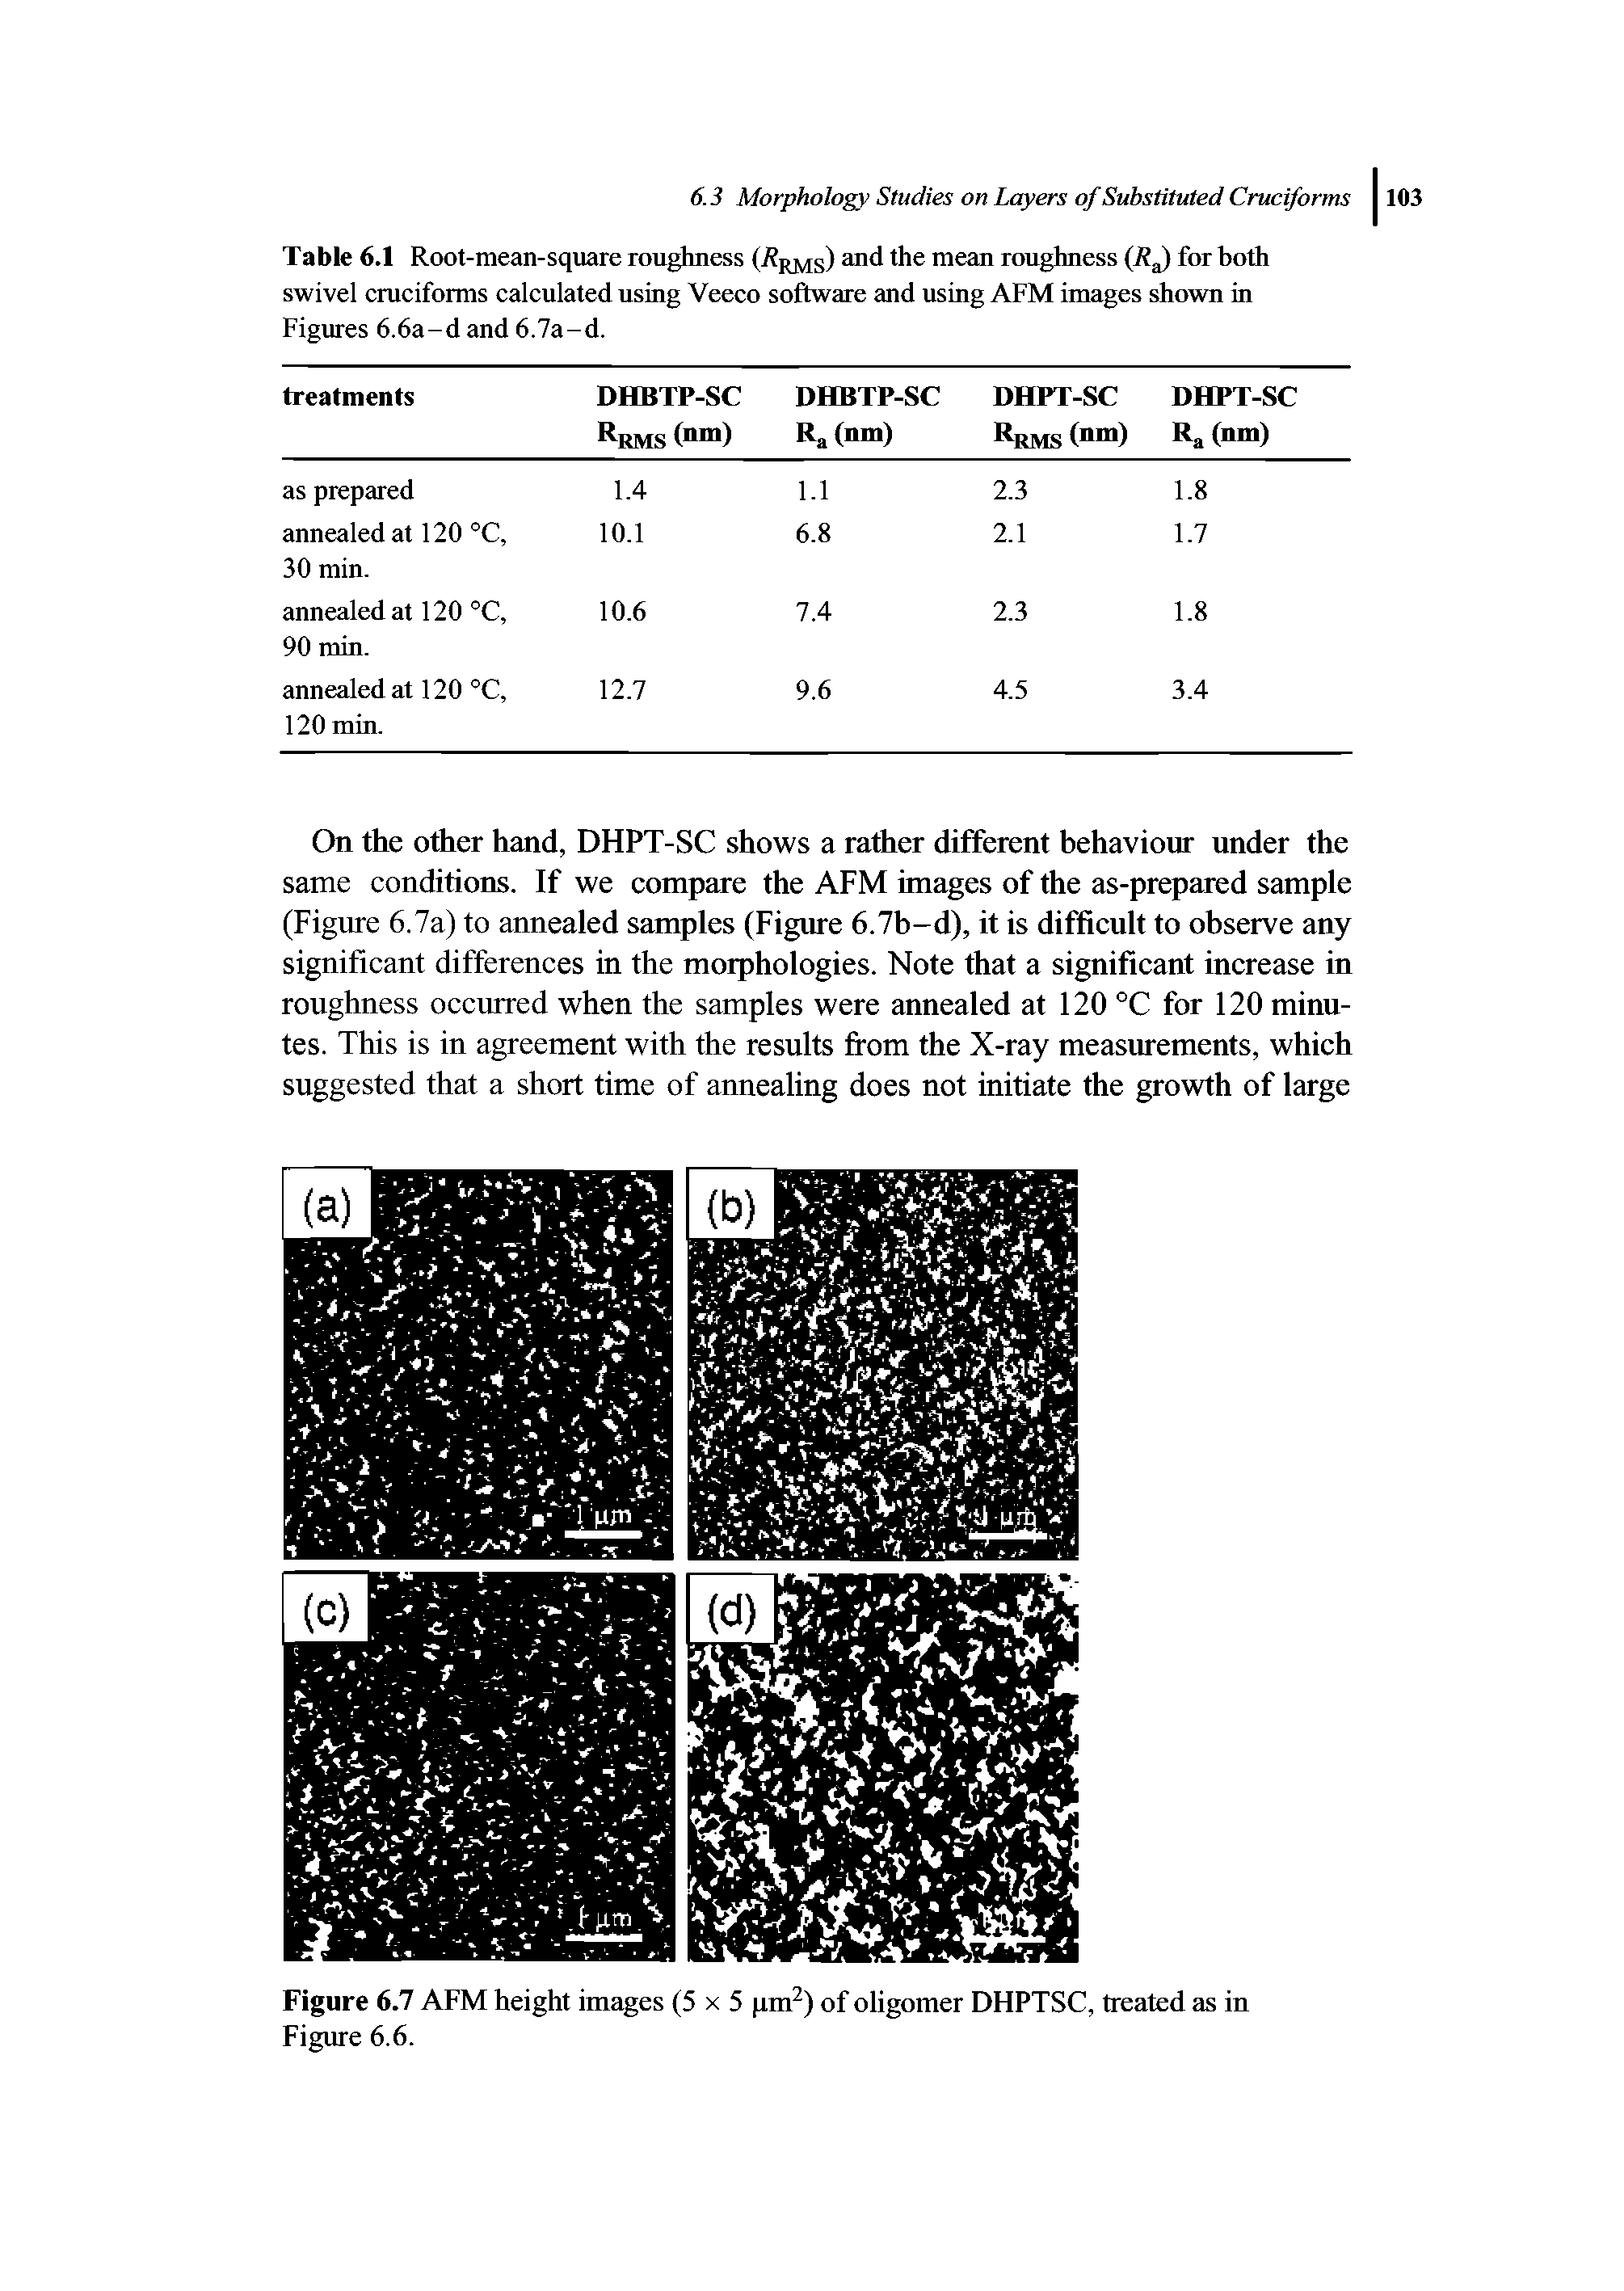 Table 6.1 Root-mean-square roughness (Rrms) the mean roughness (RJ for both swivel cruciforms calculated using Veeco software and using AFM images shown in Figures 6.6a-d and 6.7a-d.